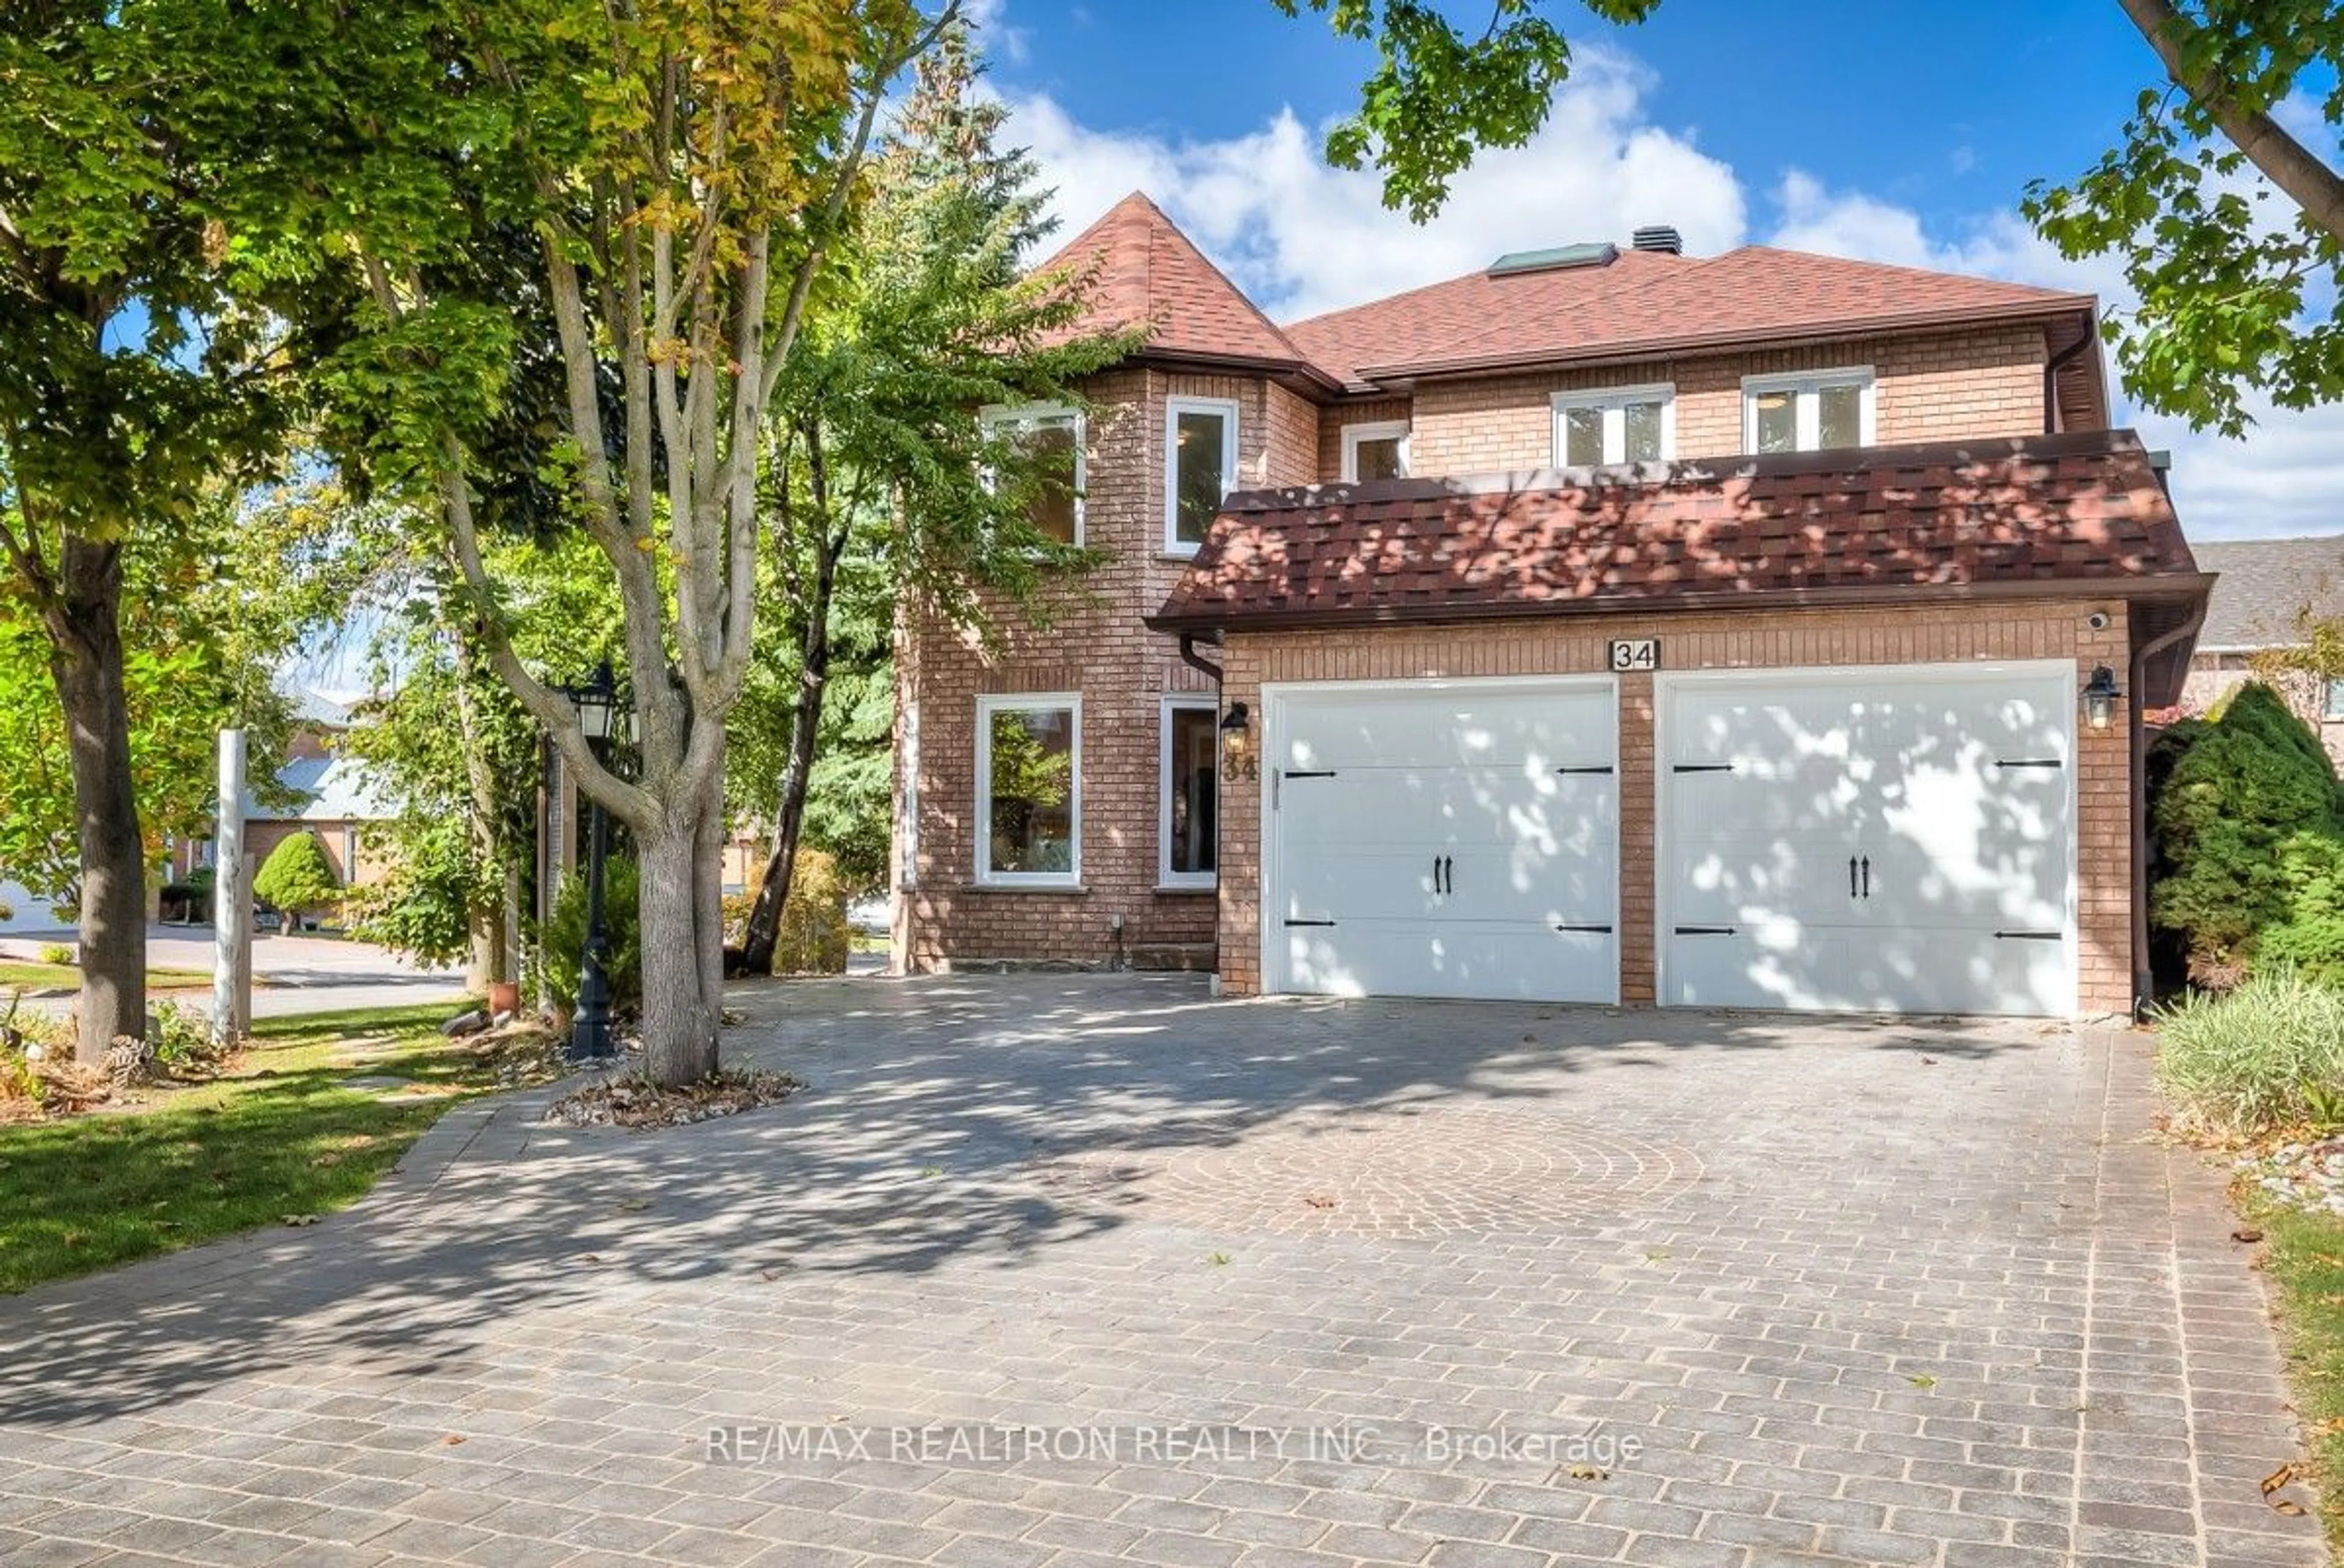 Home with brick exterior material for 34 Lisa Cres, Richmond Hill Ontario L4B 3A4